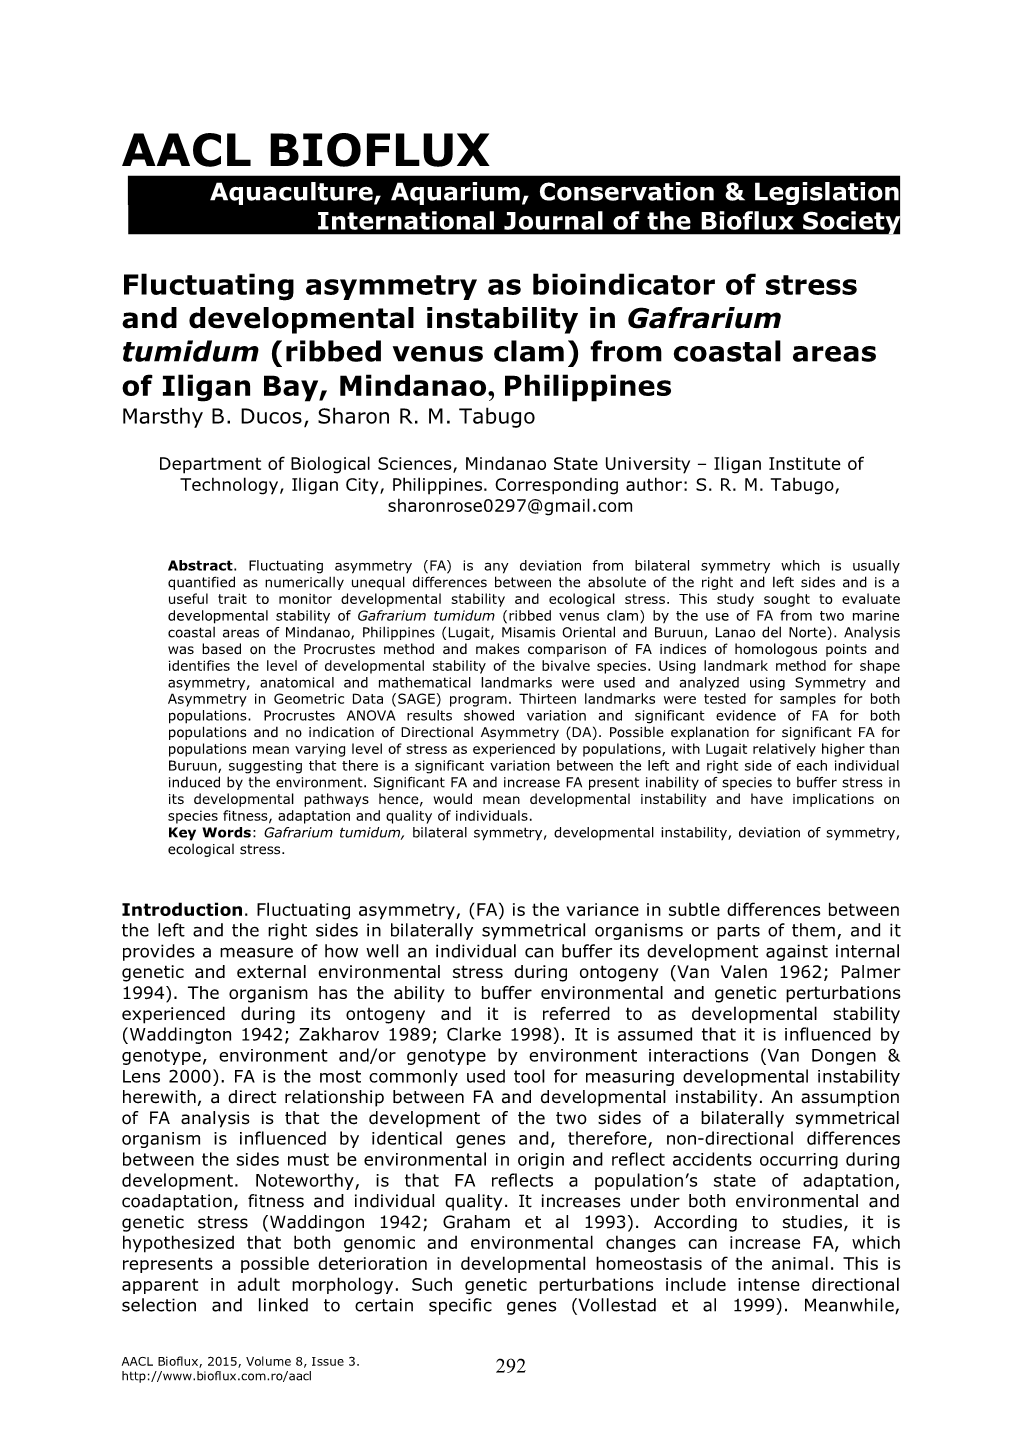 Fluctuating Asymmetry As Bioindicator of Stress and Developmental Instability in Gafrarium Tumidum (Ribbed Venus Clam) from Coastal Areas of Iligan Bay, Mindanao, Philippines